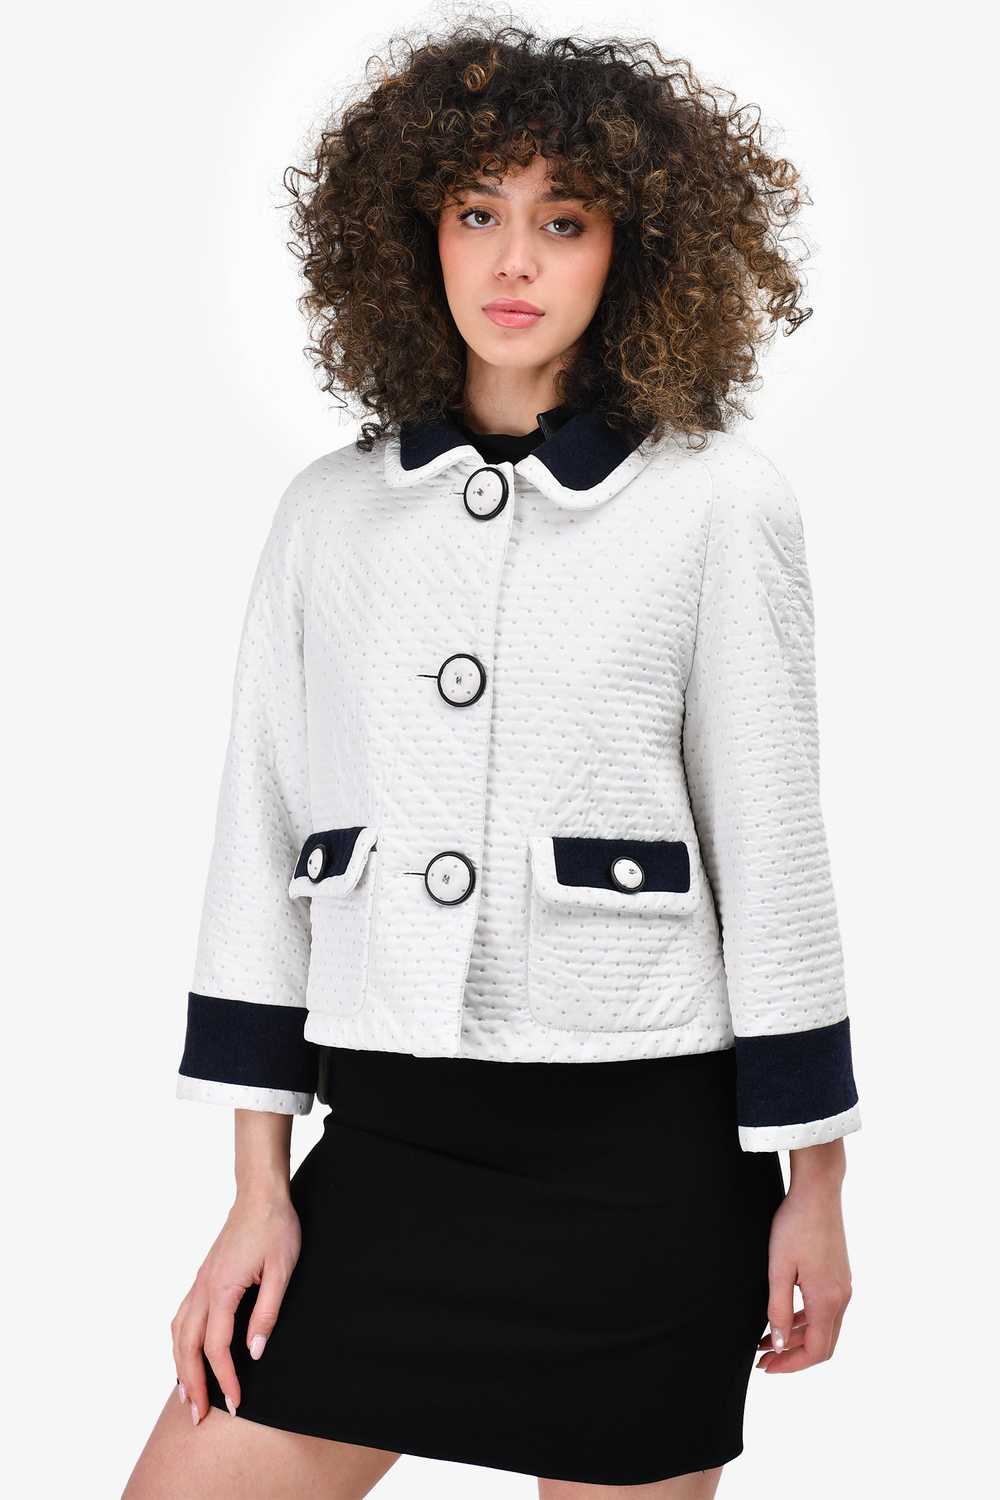 Pre-Loved Chanel™ White Perforated Fabric Jacket … - image 1